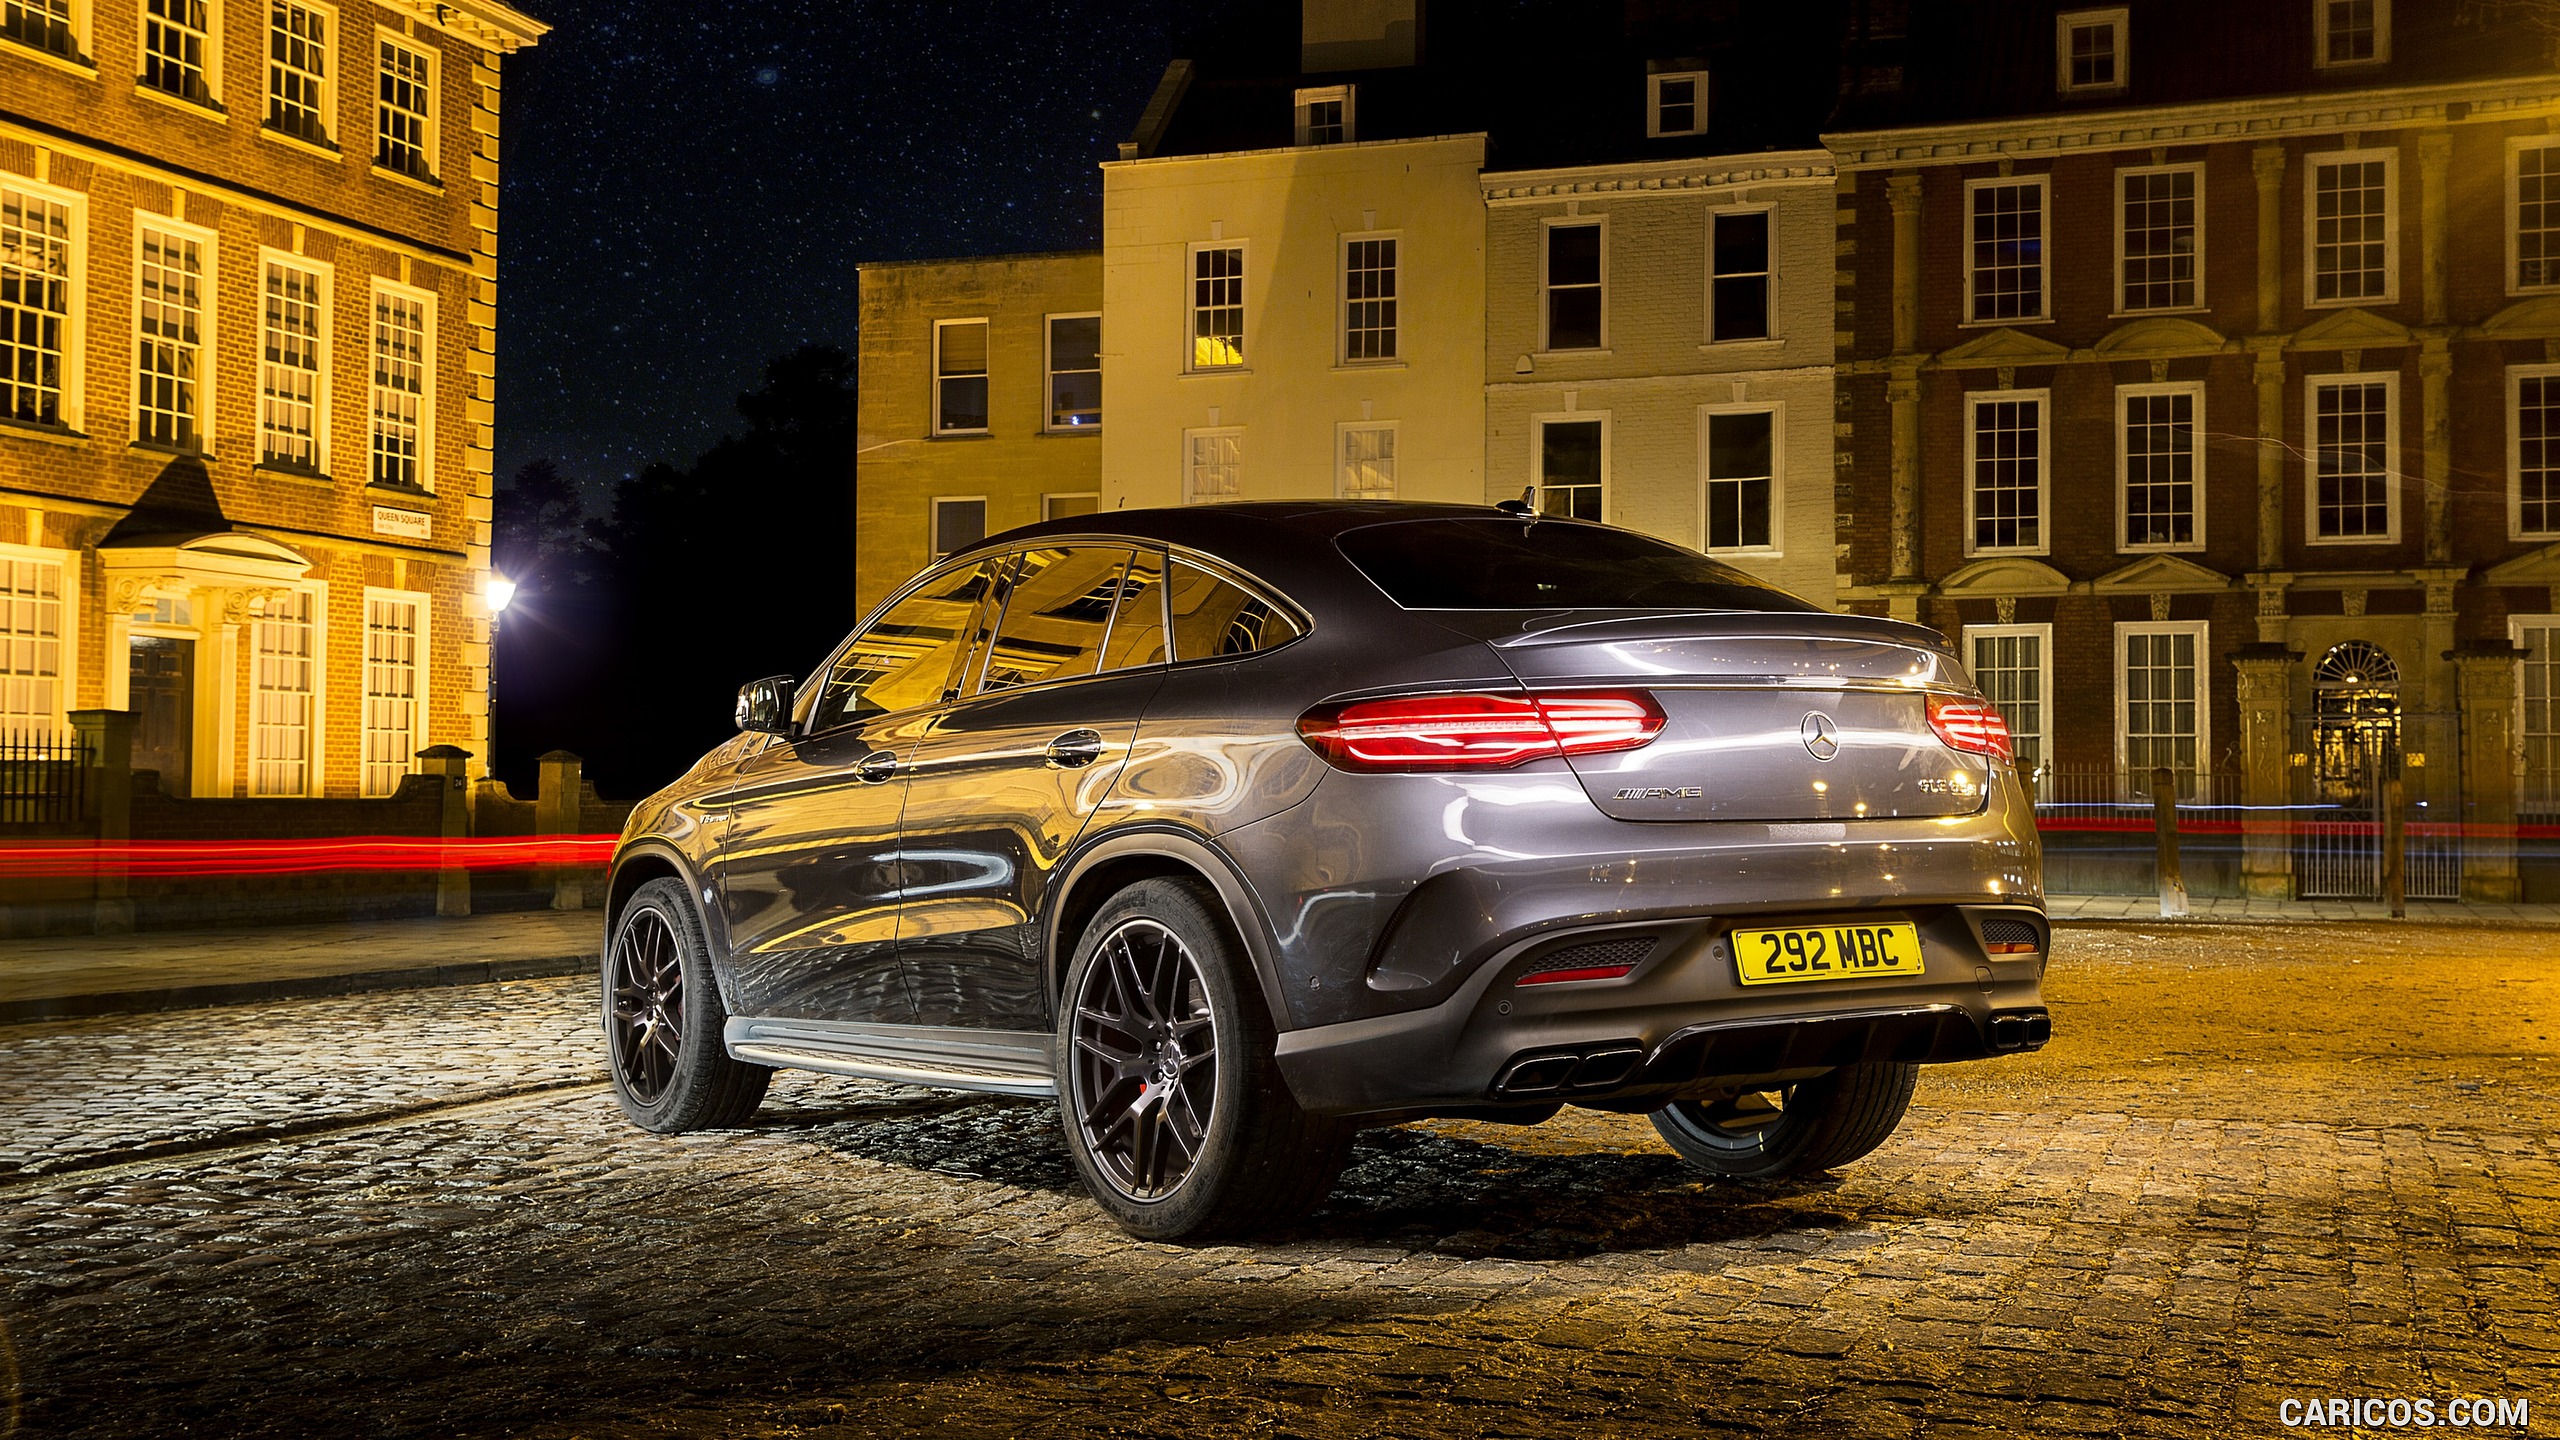 2016 Mercedes-AMG GLE 63 S Coupe (UK-Spec) - Rear, #52 of 65